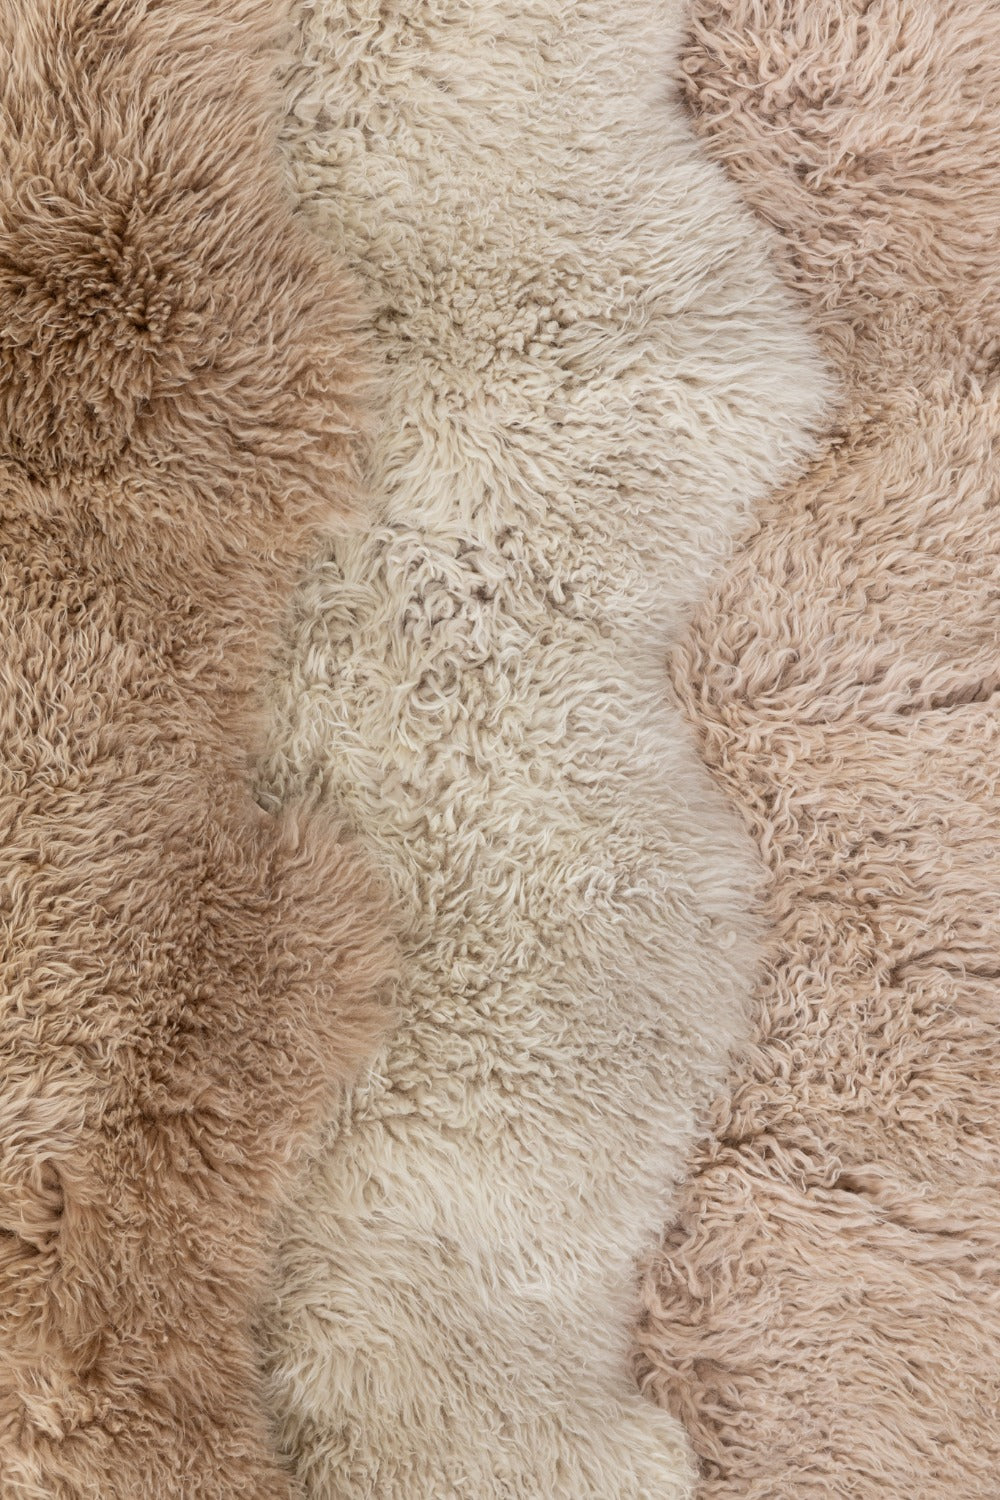 Why Rugs Should be Layered On Carpet - Kelley Nan